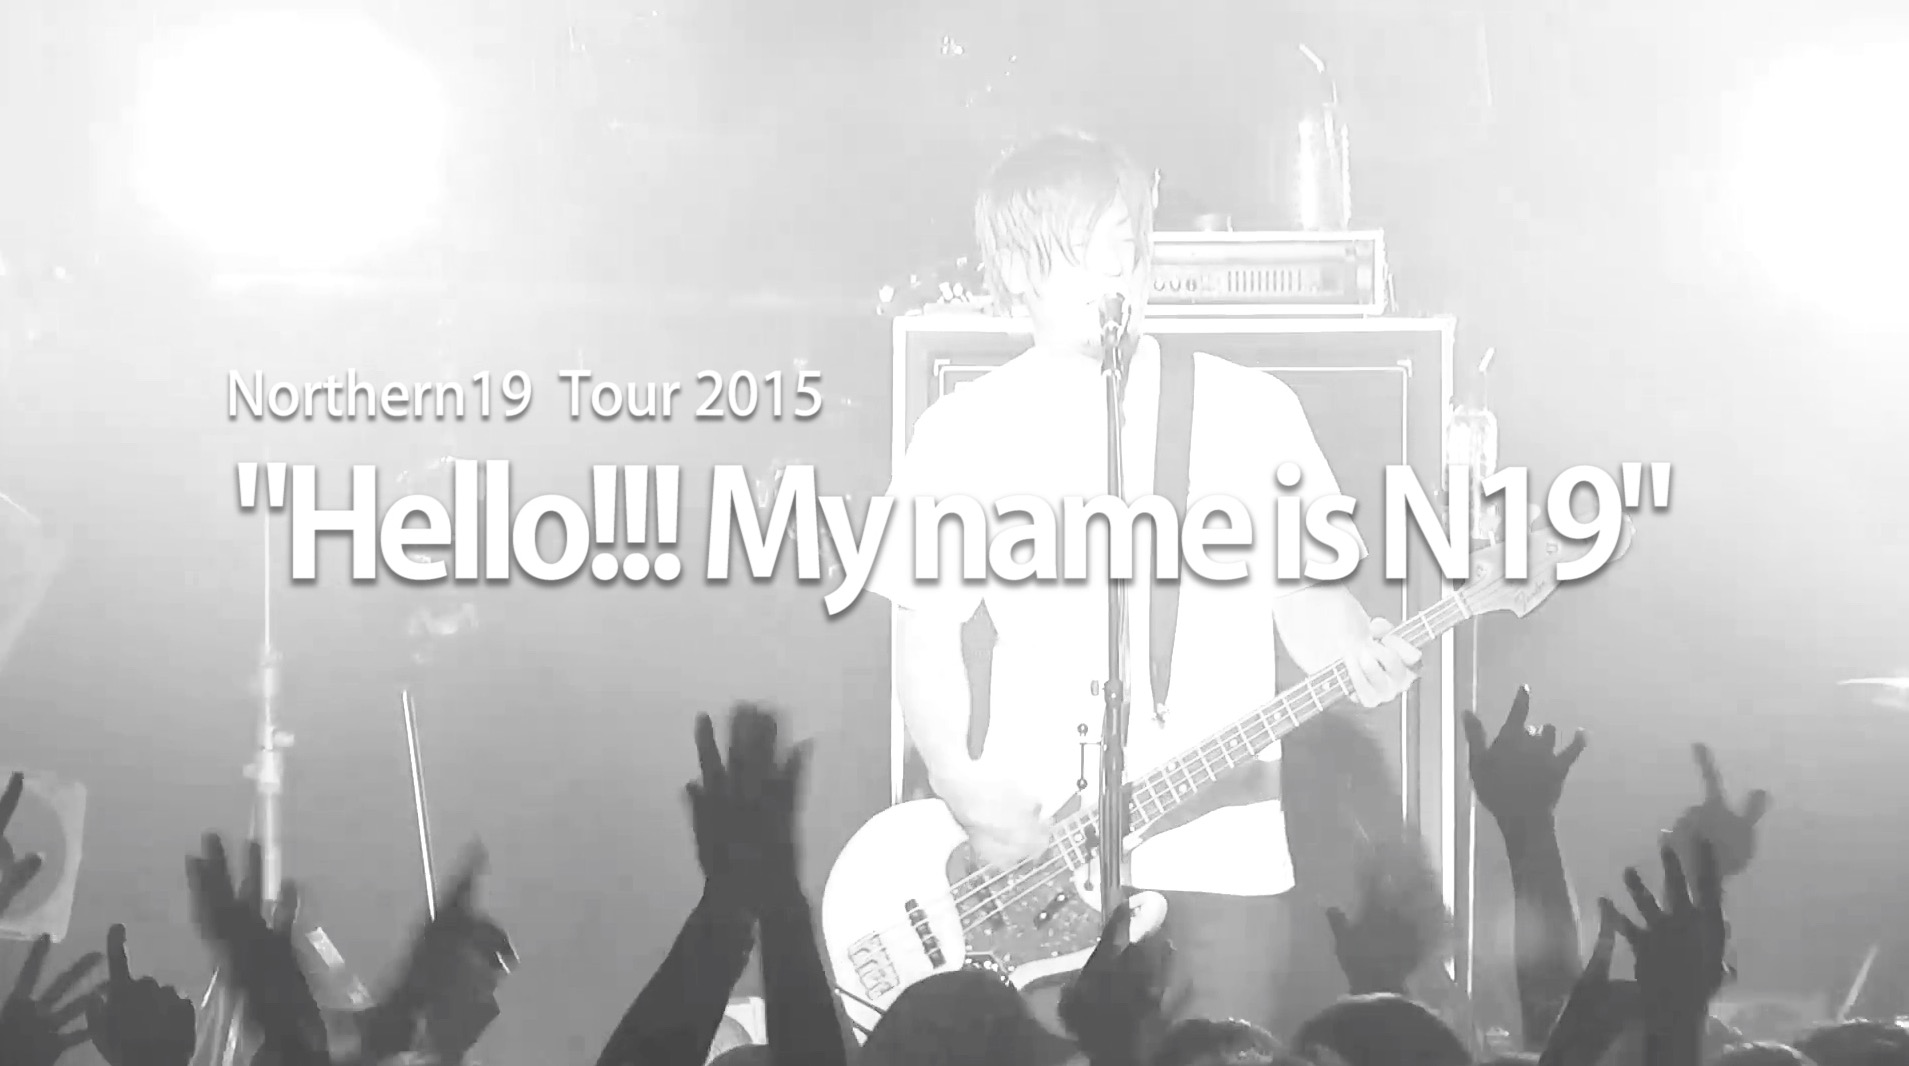 Northern19 "Hello!!! My name is N19" Info